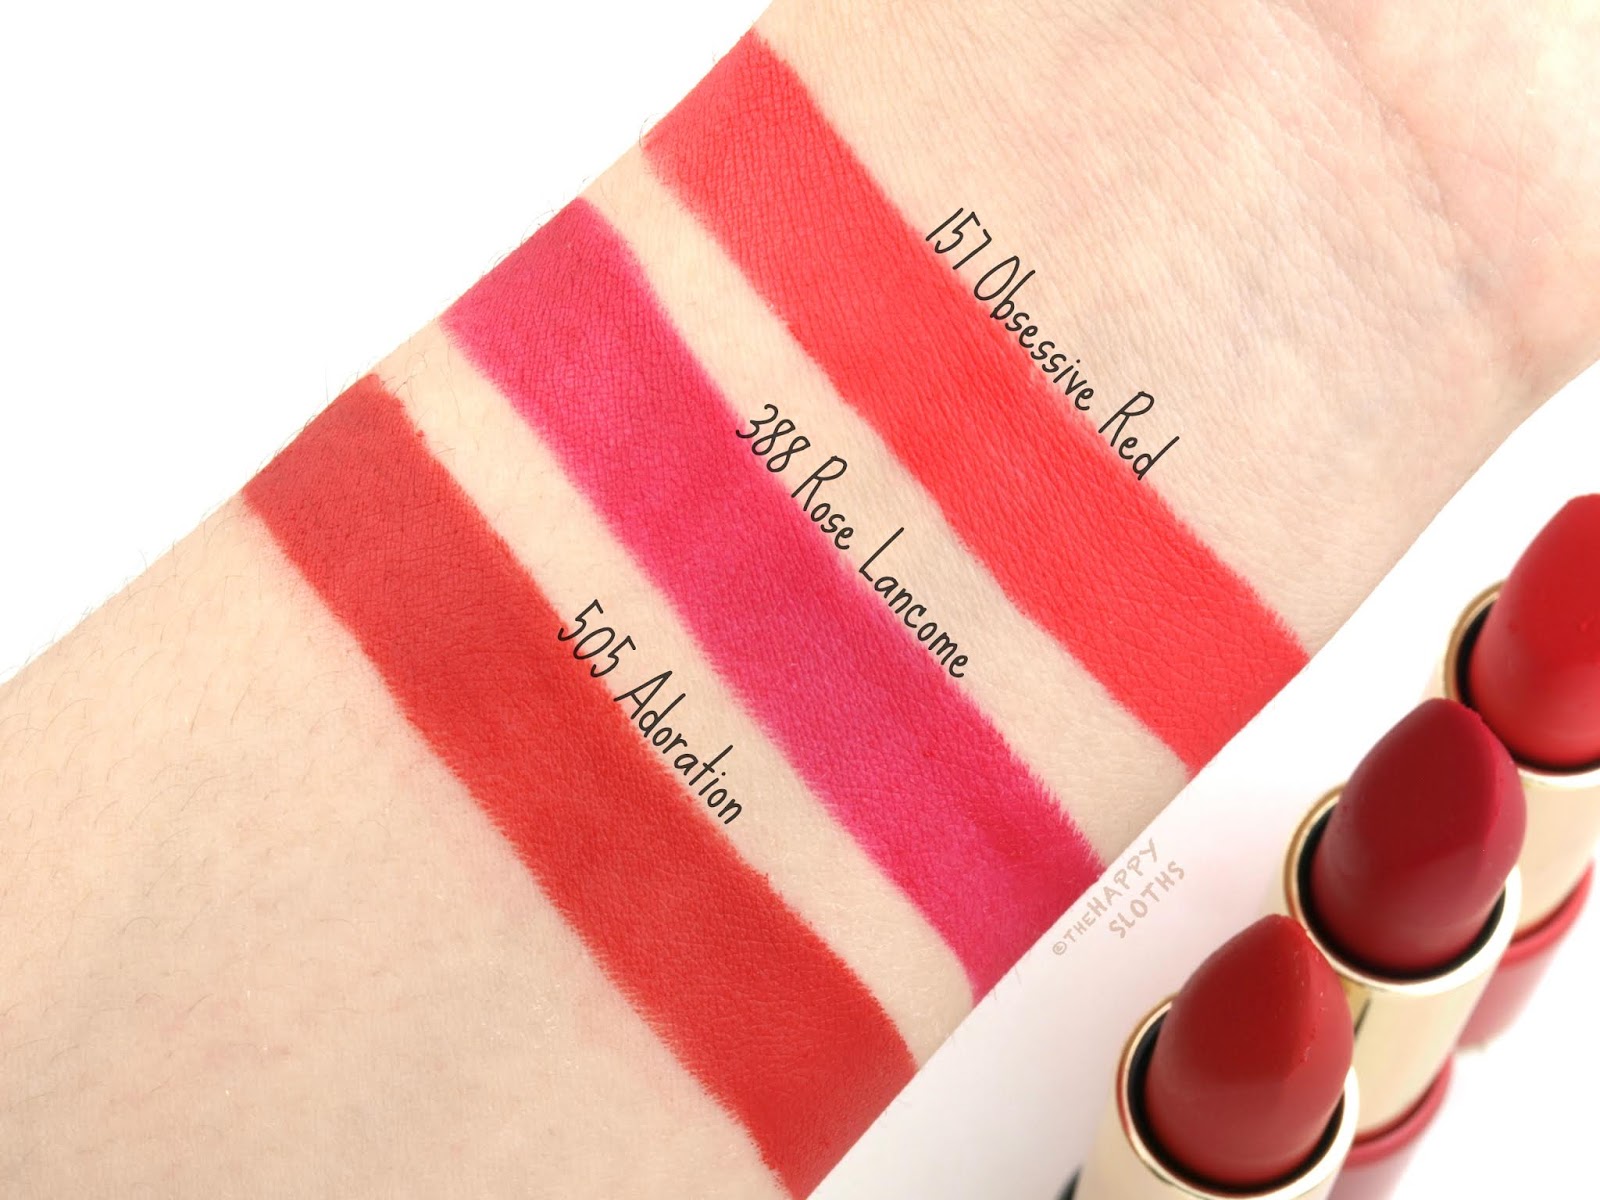 Lancome | L'Absolu Rouge Drama Matte Lipstick: Review and Swatches